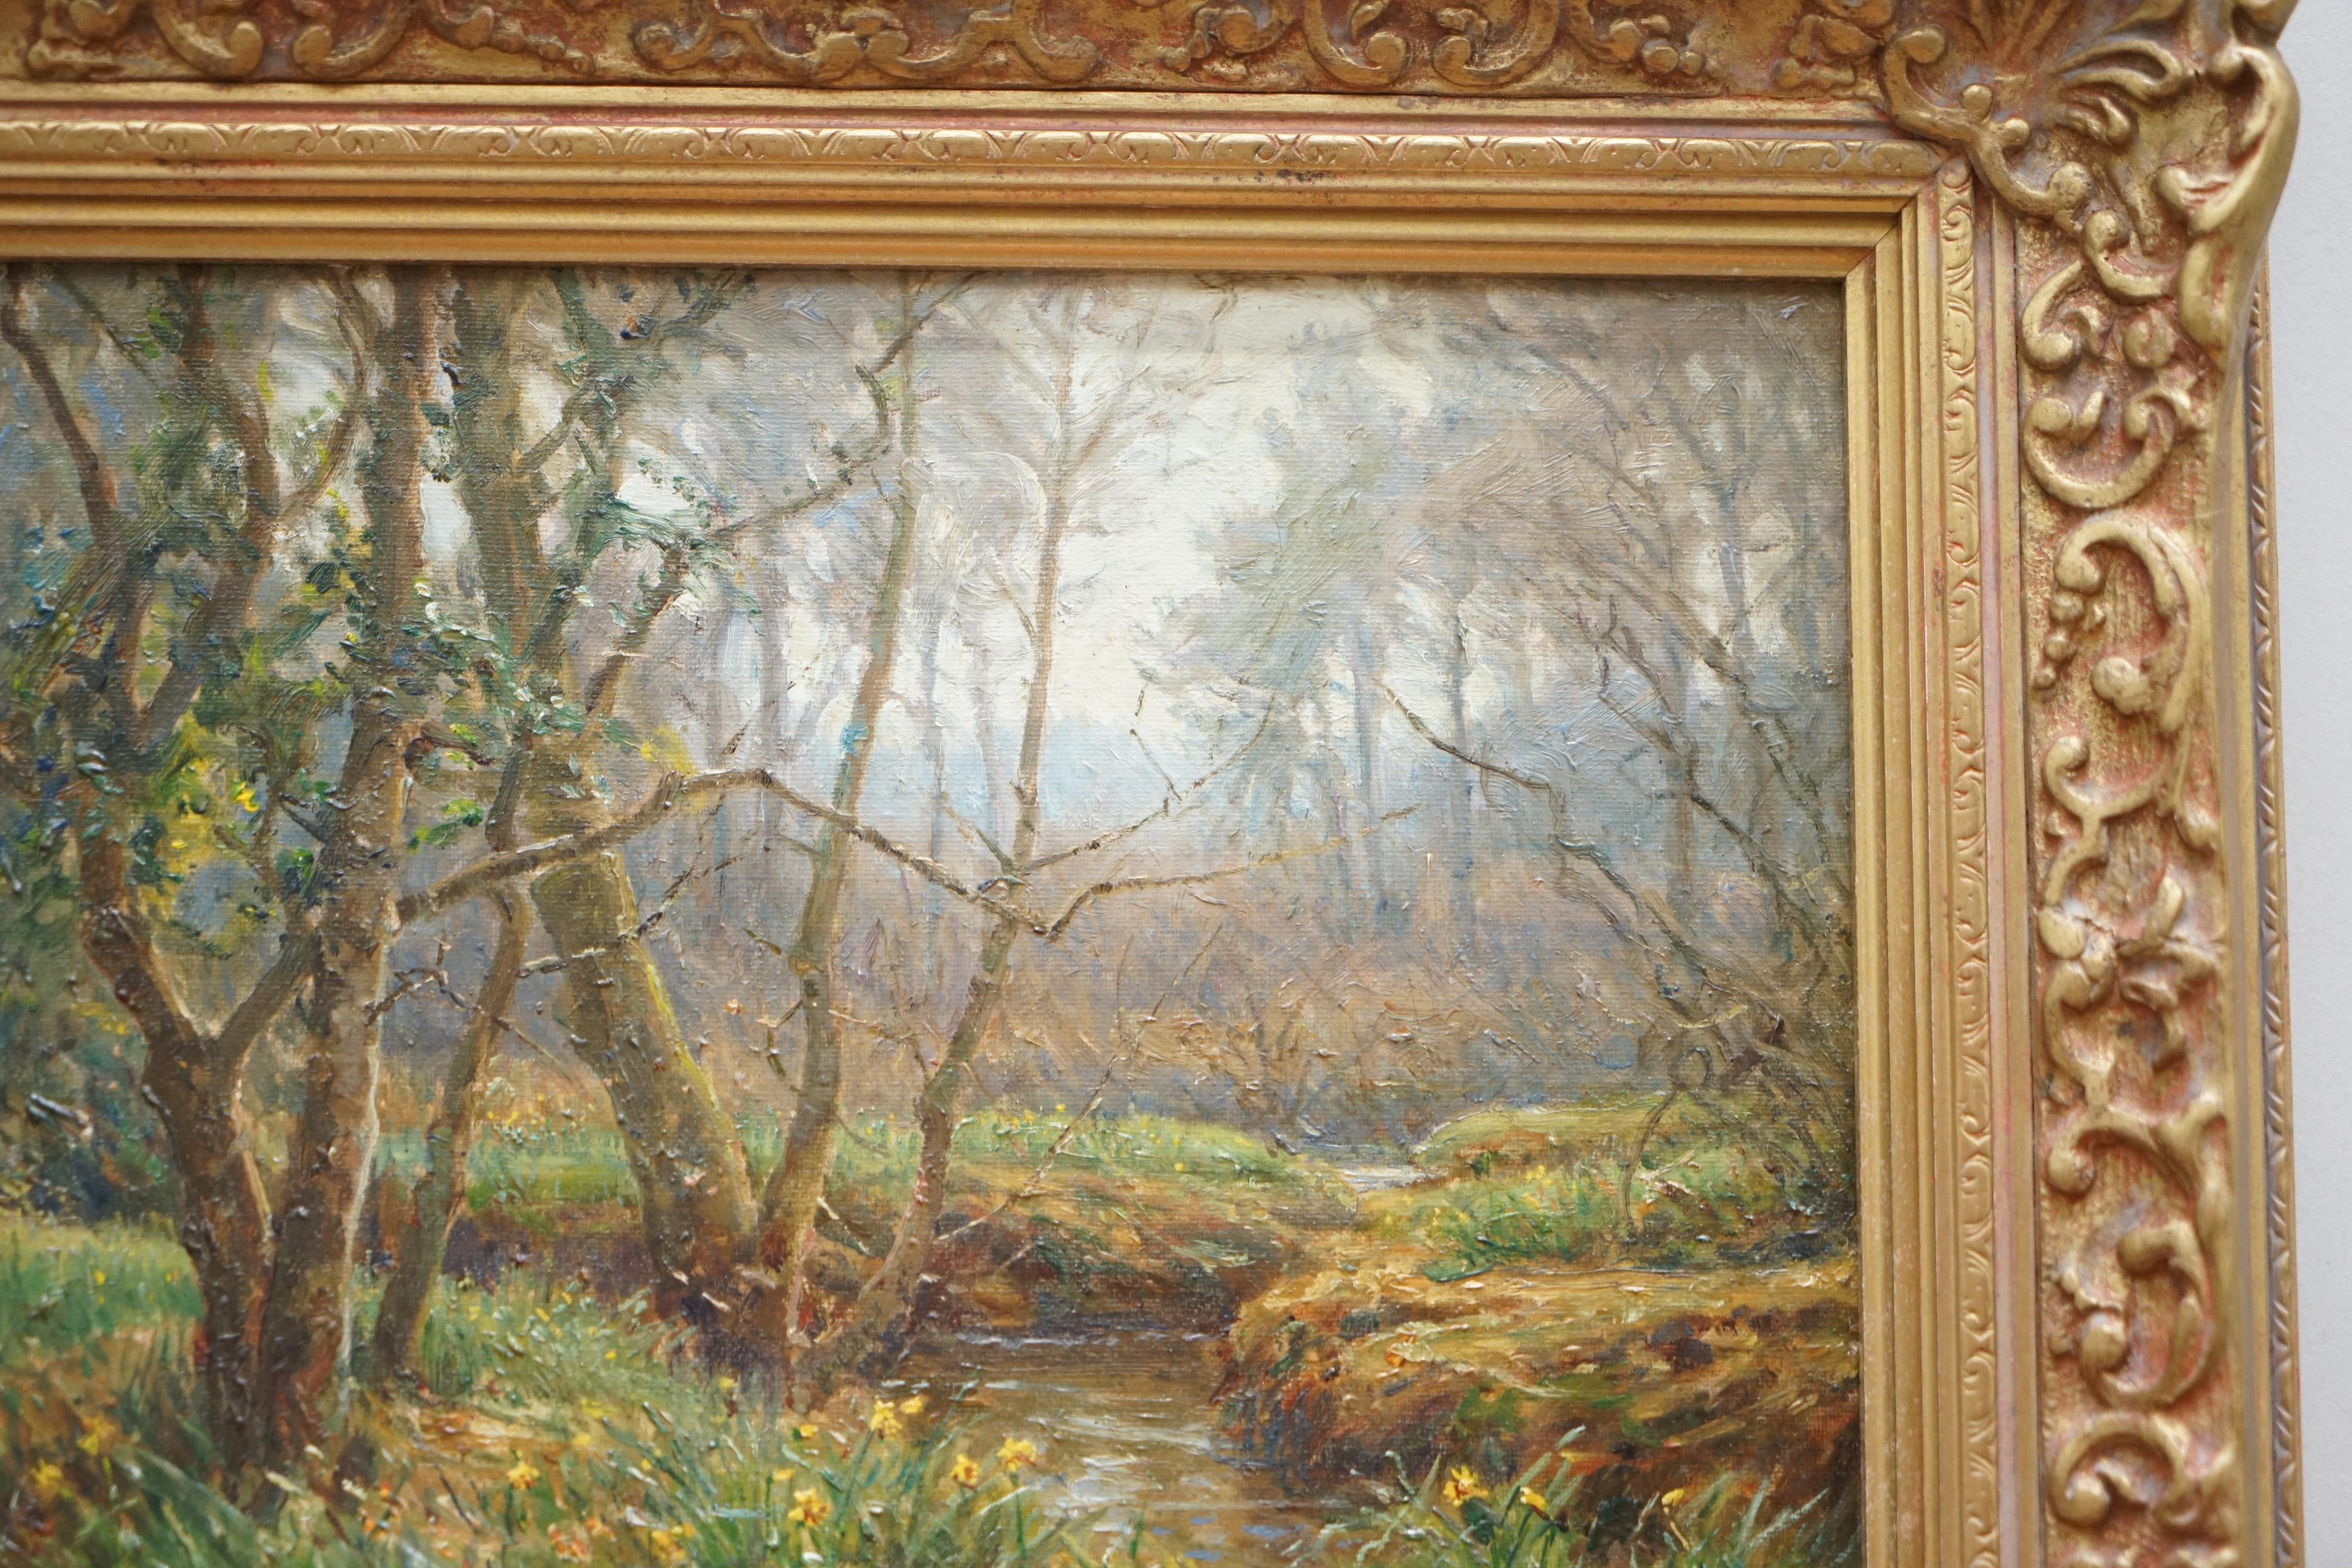 Hand-Painted Frederick Golden Short New Forest Woodland Signed and Dated 1920 Oil Painting For Sale